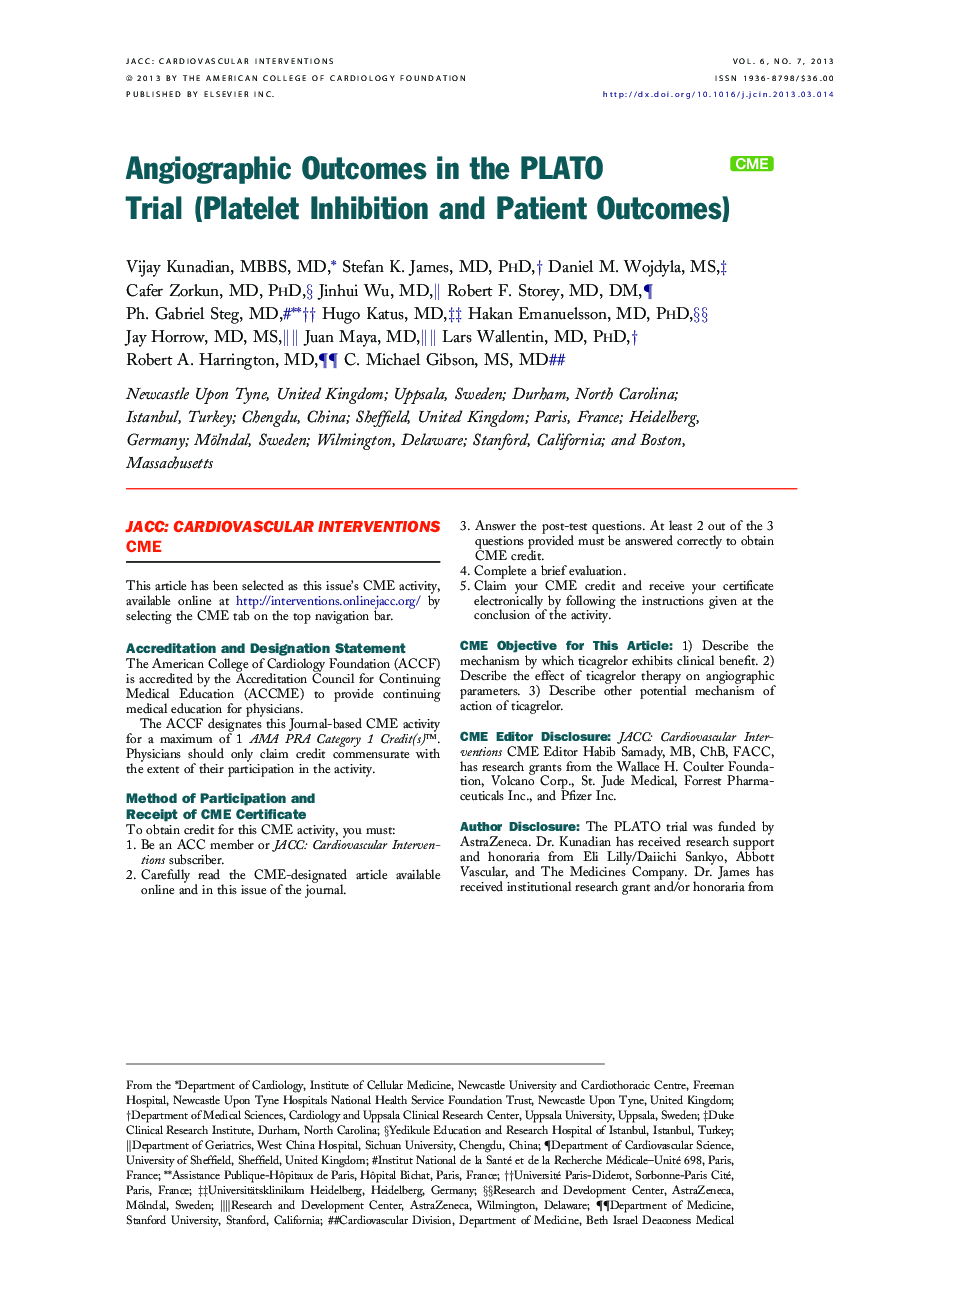 Angiographic Outcomes in the PLATO Trial (Platelet Inhibition and Patient Outcomes) 